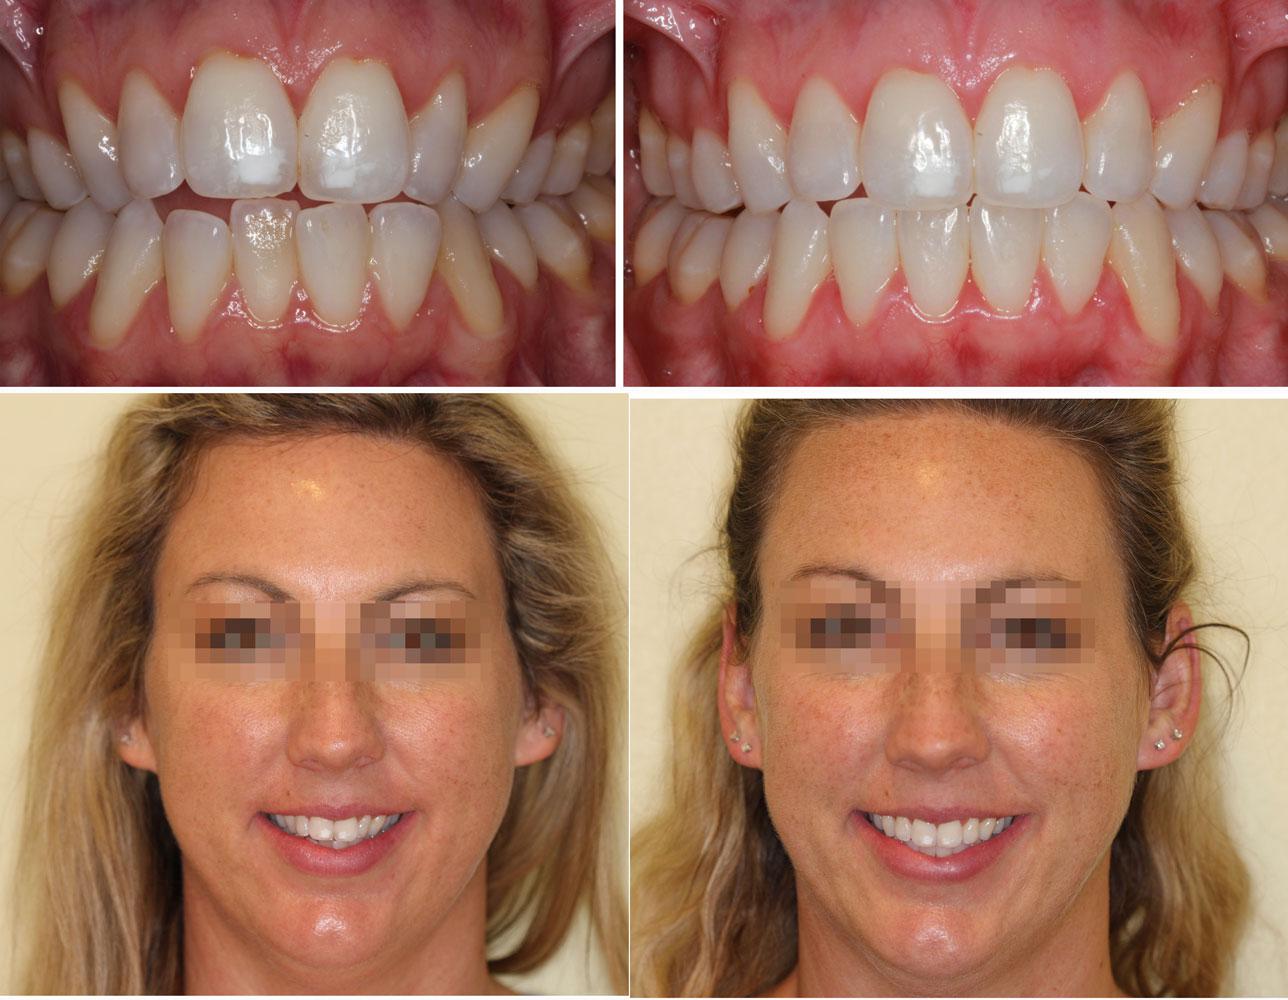 Invisalign can help improve your smile and facial features